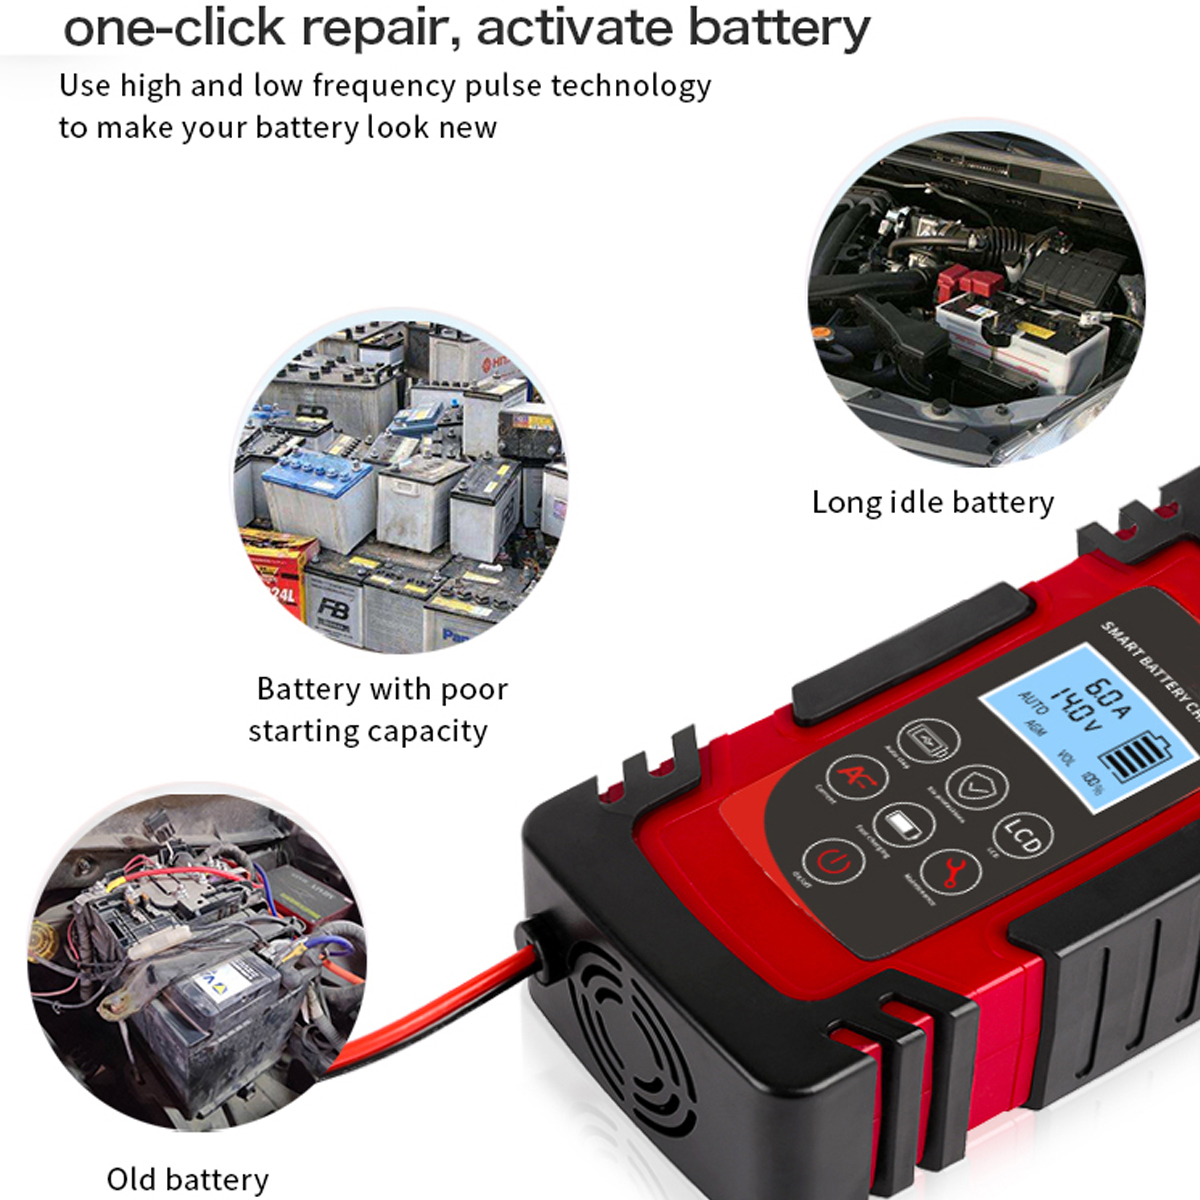 Smart-Automatic-12V24V-8A-Car-Battery-Charger-Motorcycle-Repair-Pulse-Repair-Activation-1855796-6